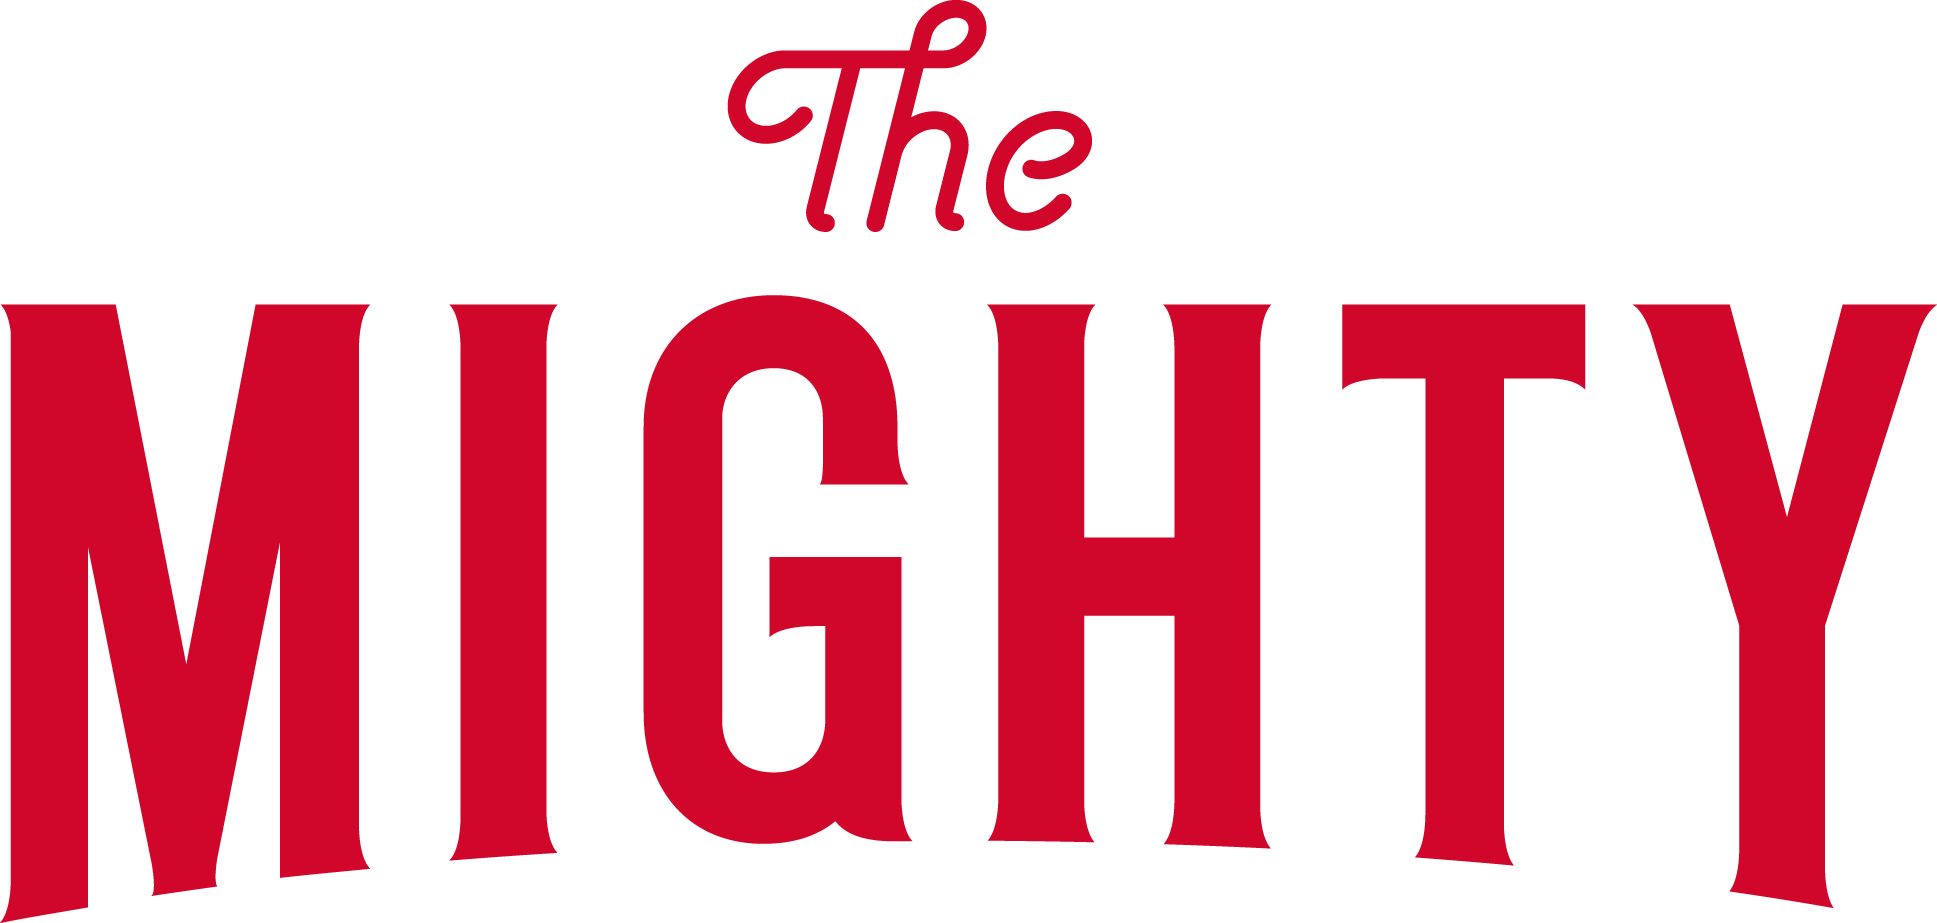 TheMightyLogo-red.png